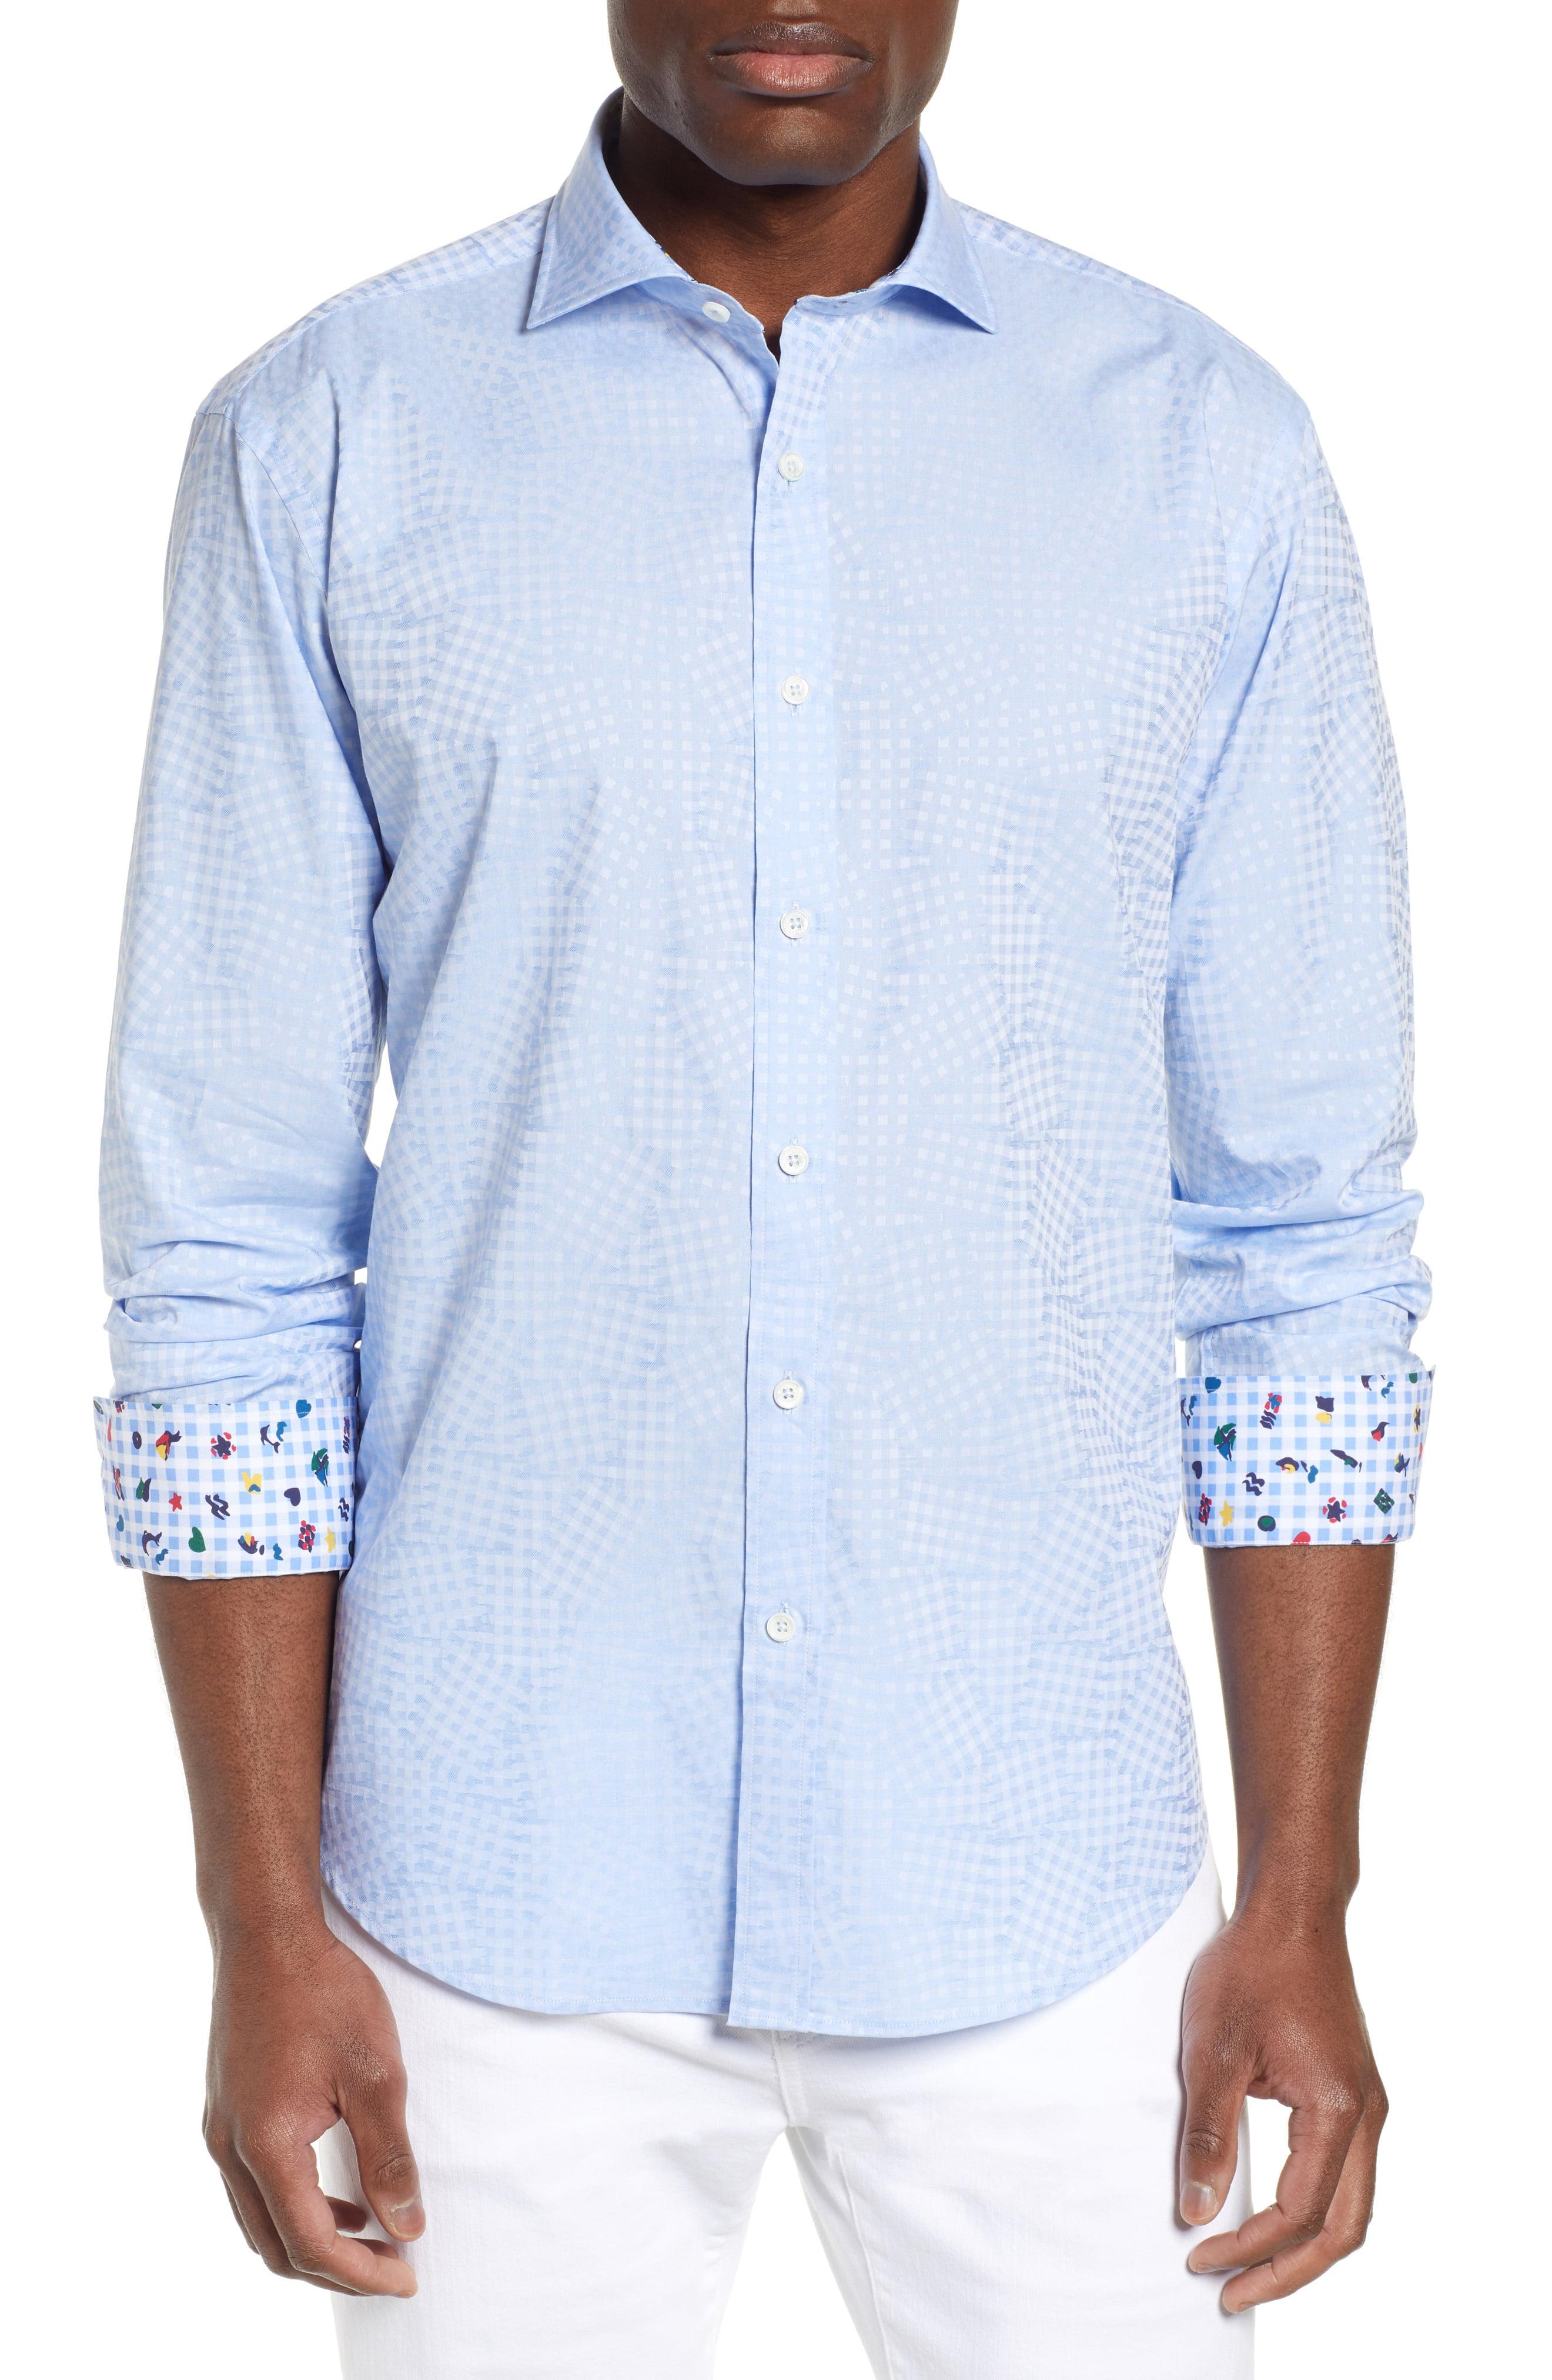 Lyst - Bugatchi Shaped Fit Print Cotton Sport Shirt in Blue for Men